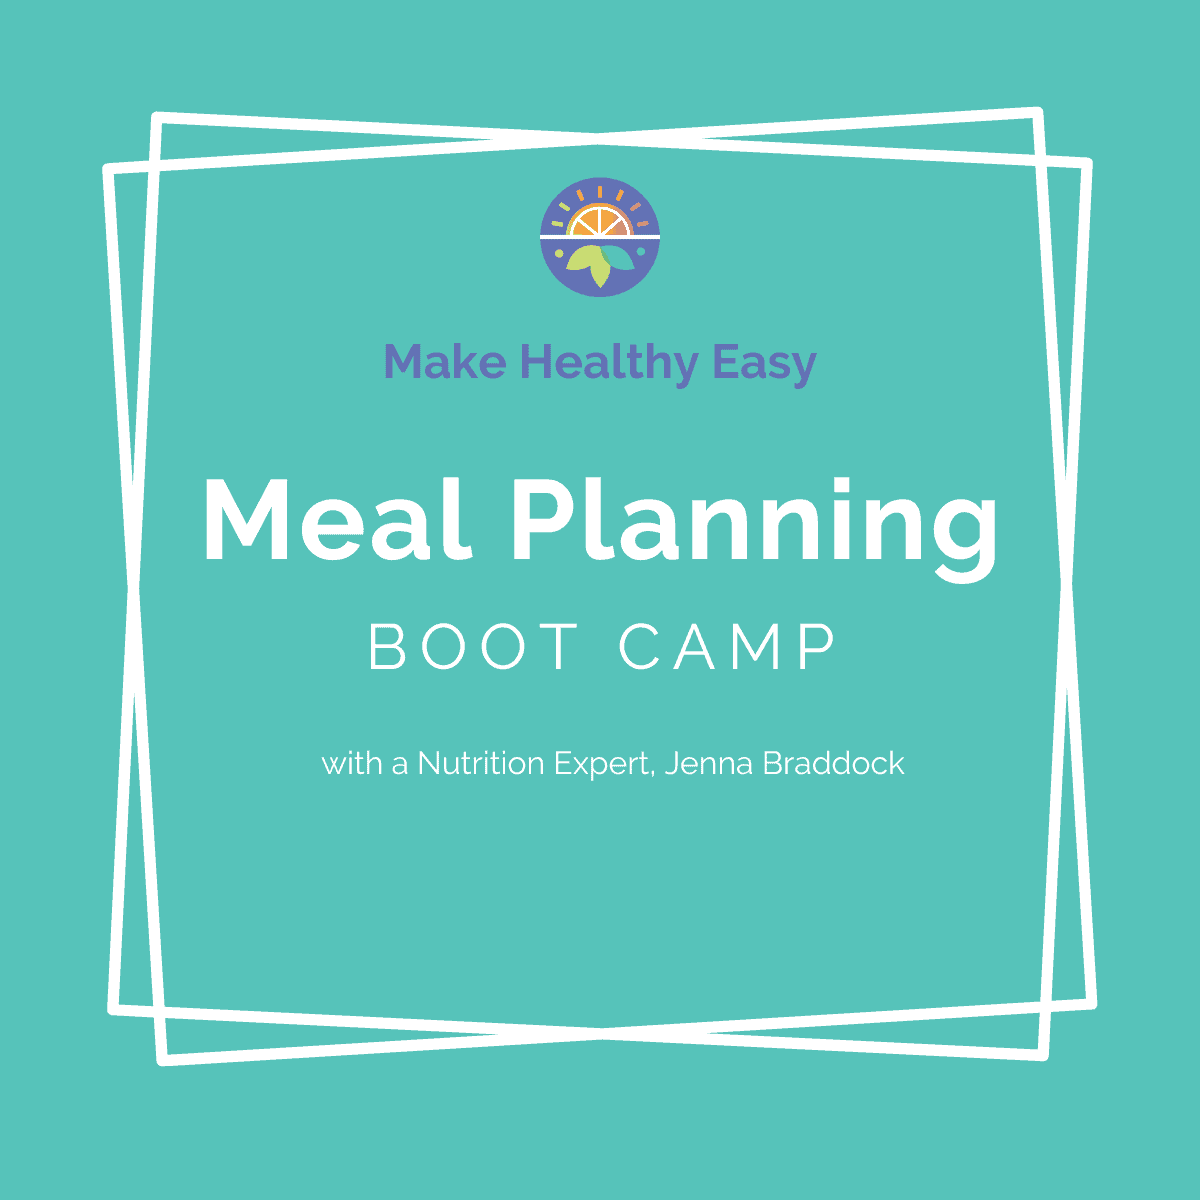 Make Healthy Easy Meal Planning Boot Camp with a Nutrition Expert Jenna Braddock